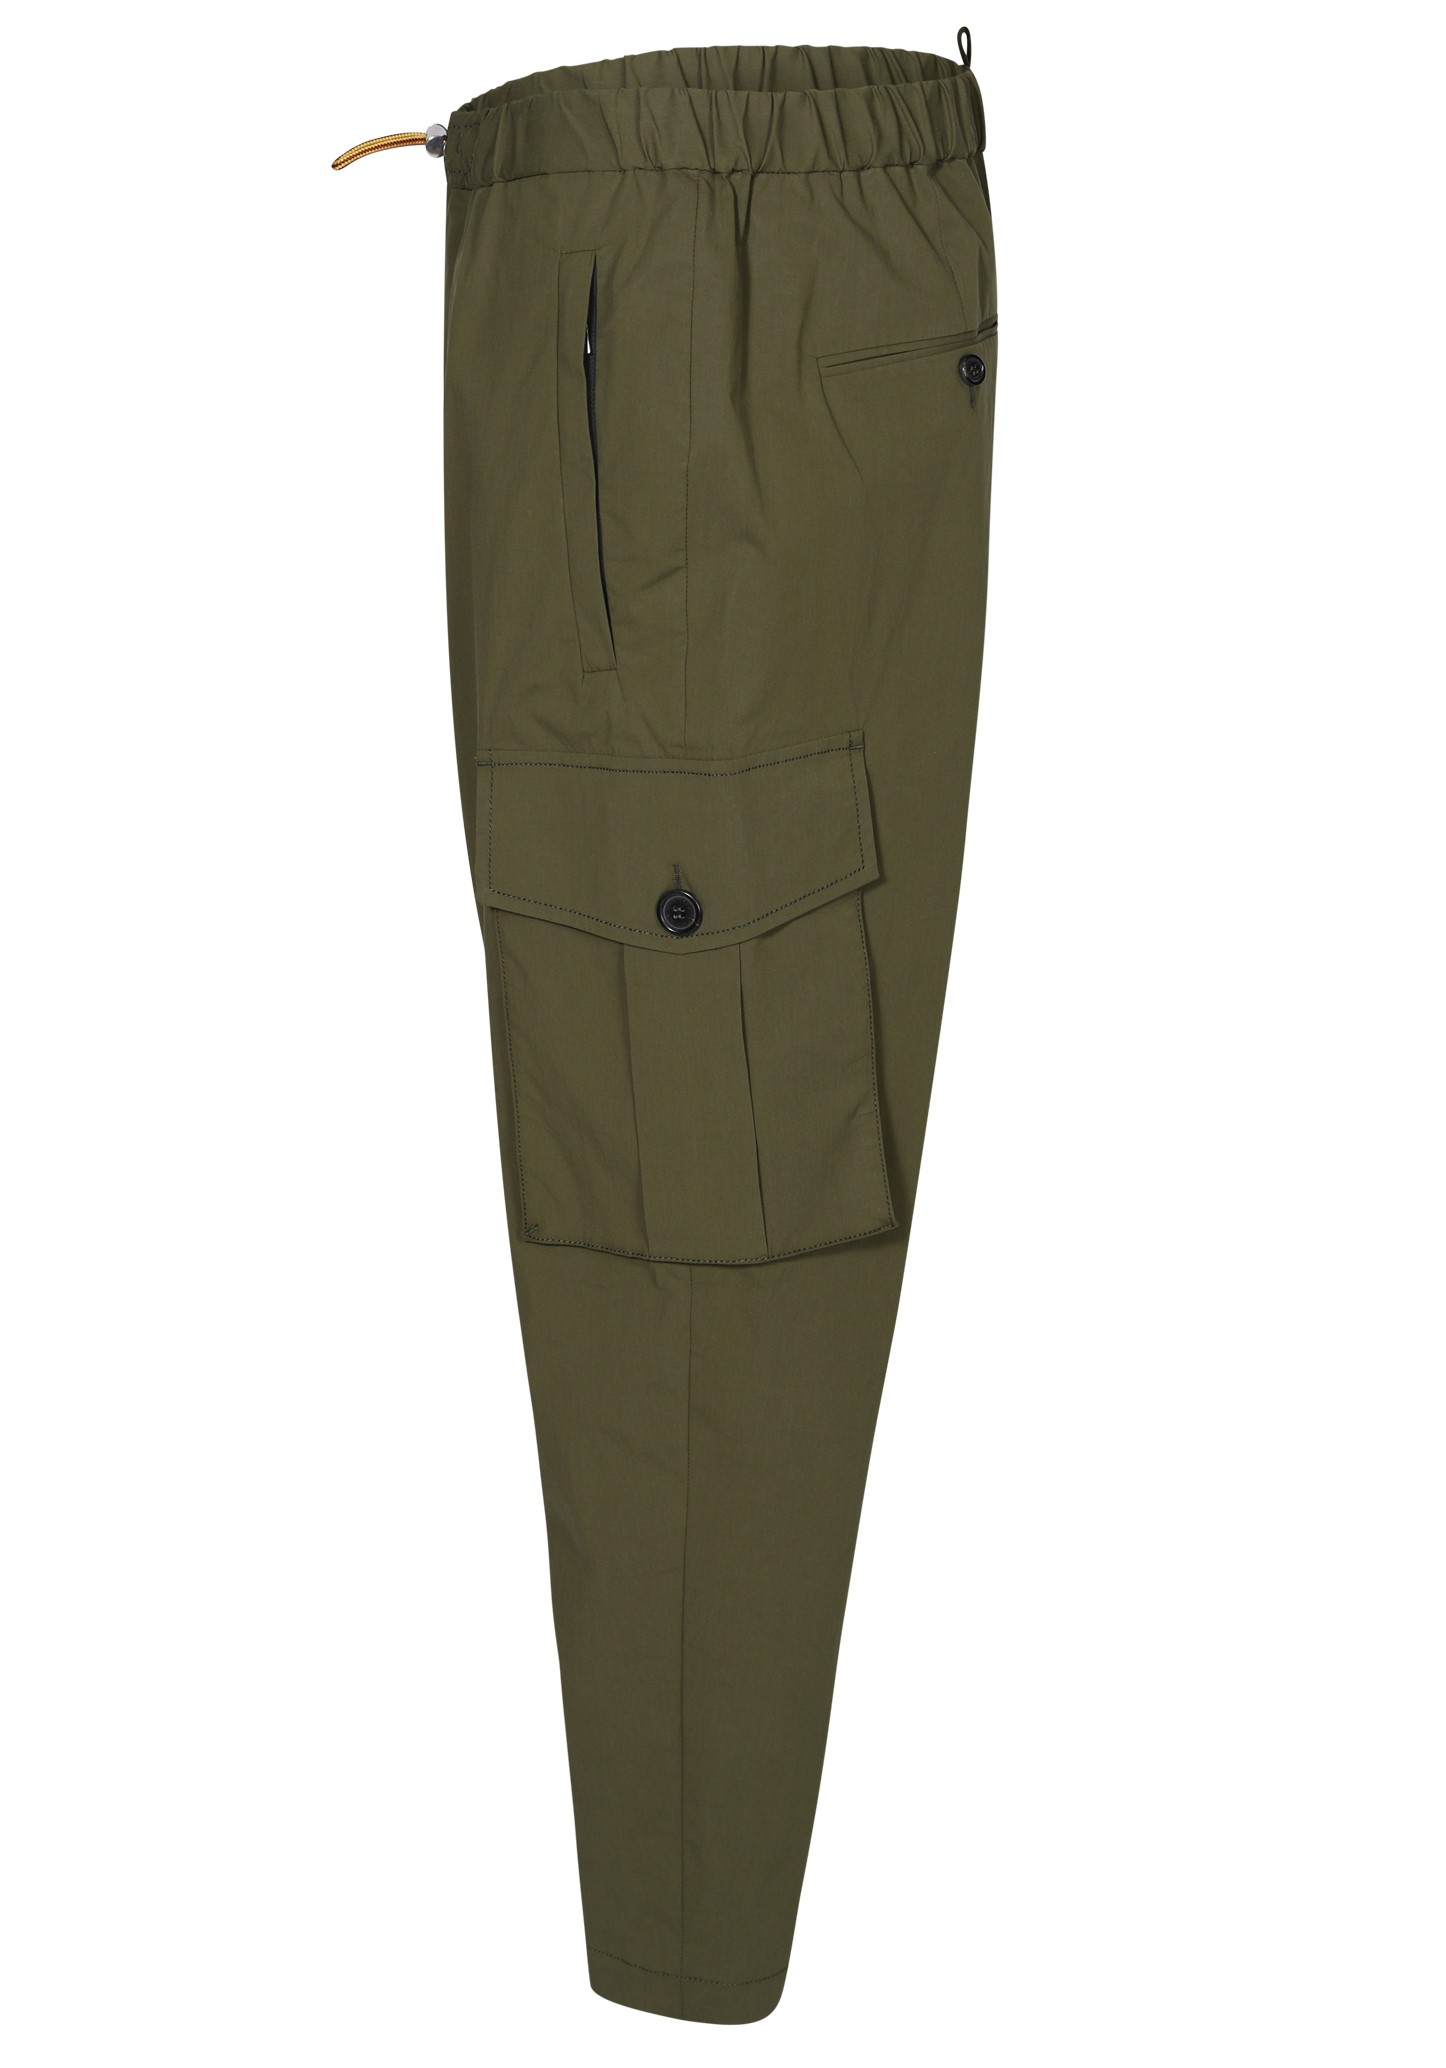 DSQUARED2 Pully Cargo Pant in Olive 52